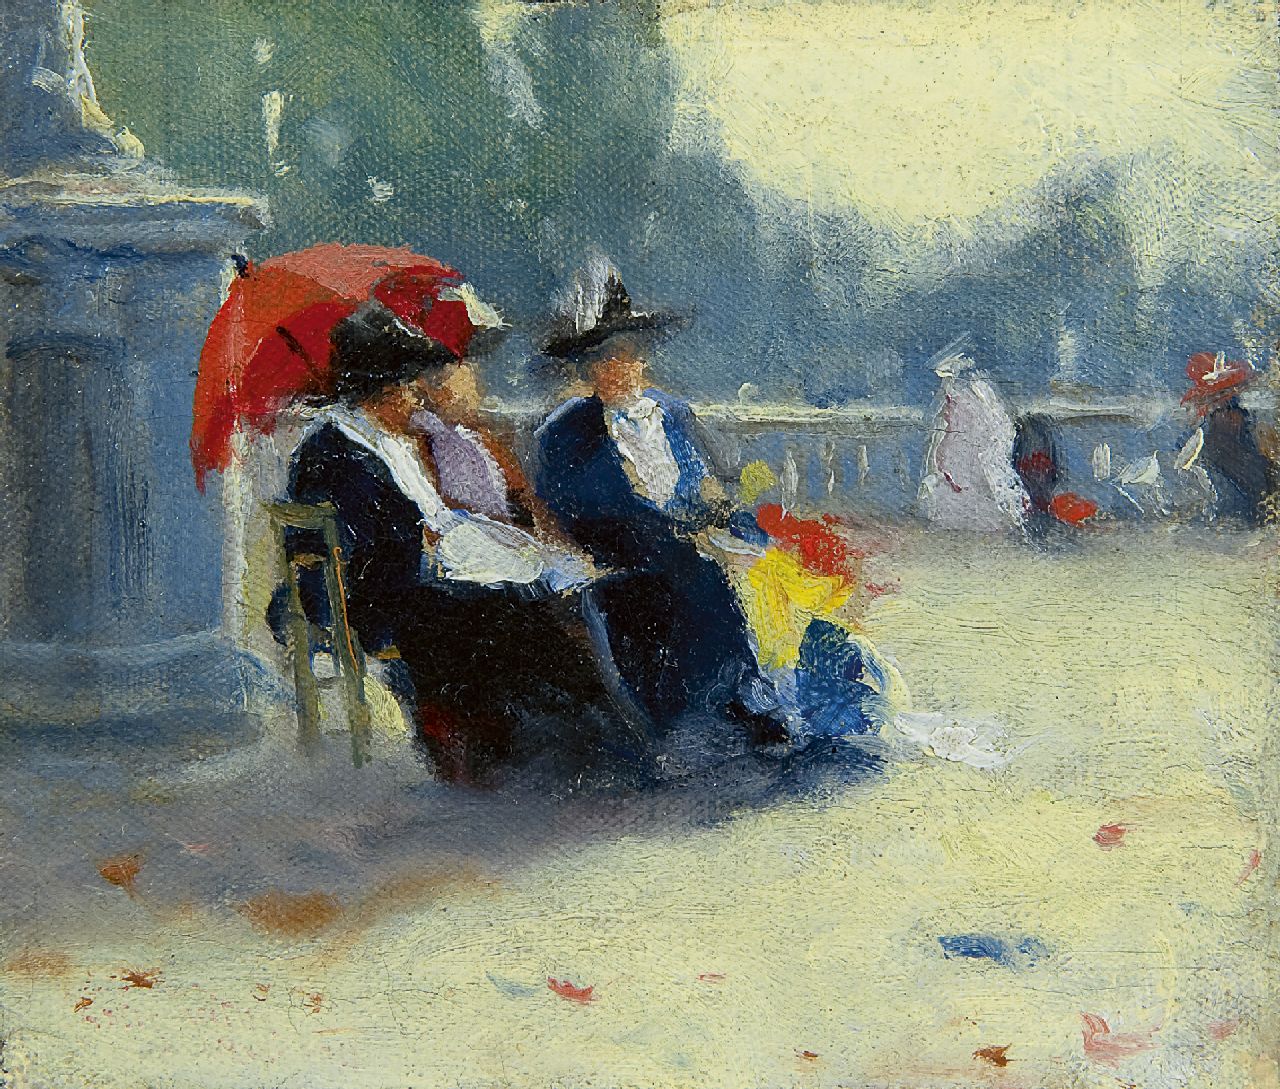 Castle Keith W.  | Walter Castle Keith, Friends in the Jardin du Luxembourg, oil on canvas laid down on panel 9.8 x 11.4 cm, signed on the reverse and dated 1911 on the reverse